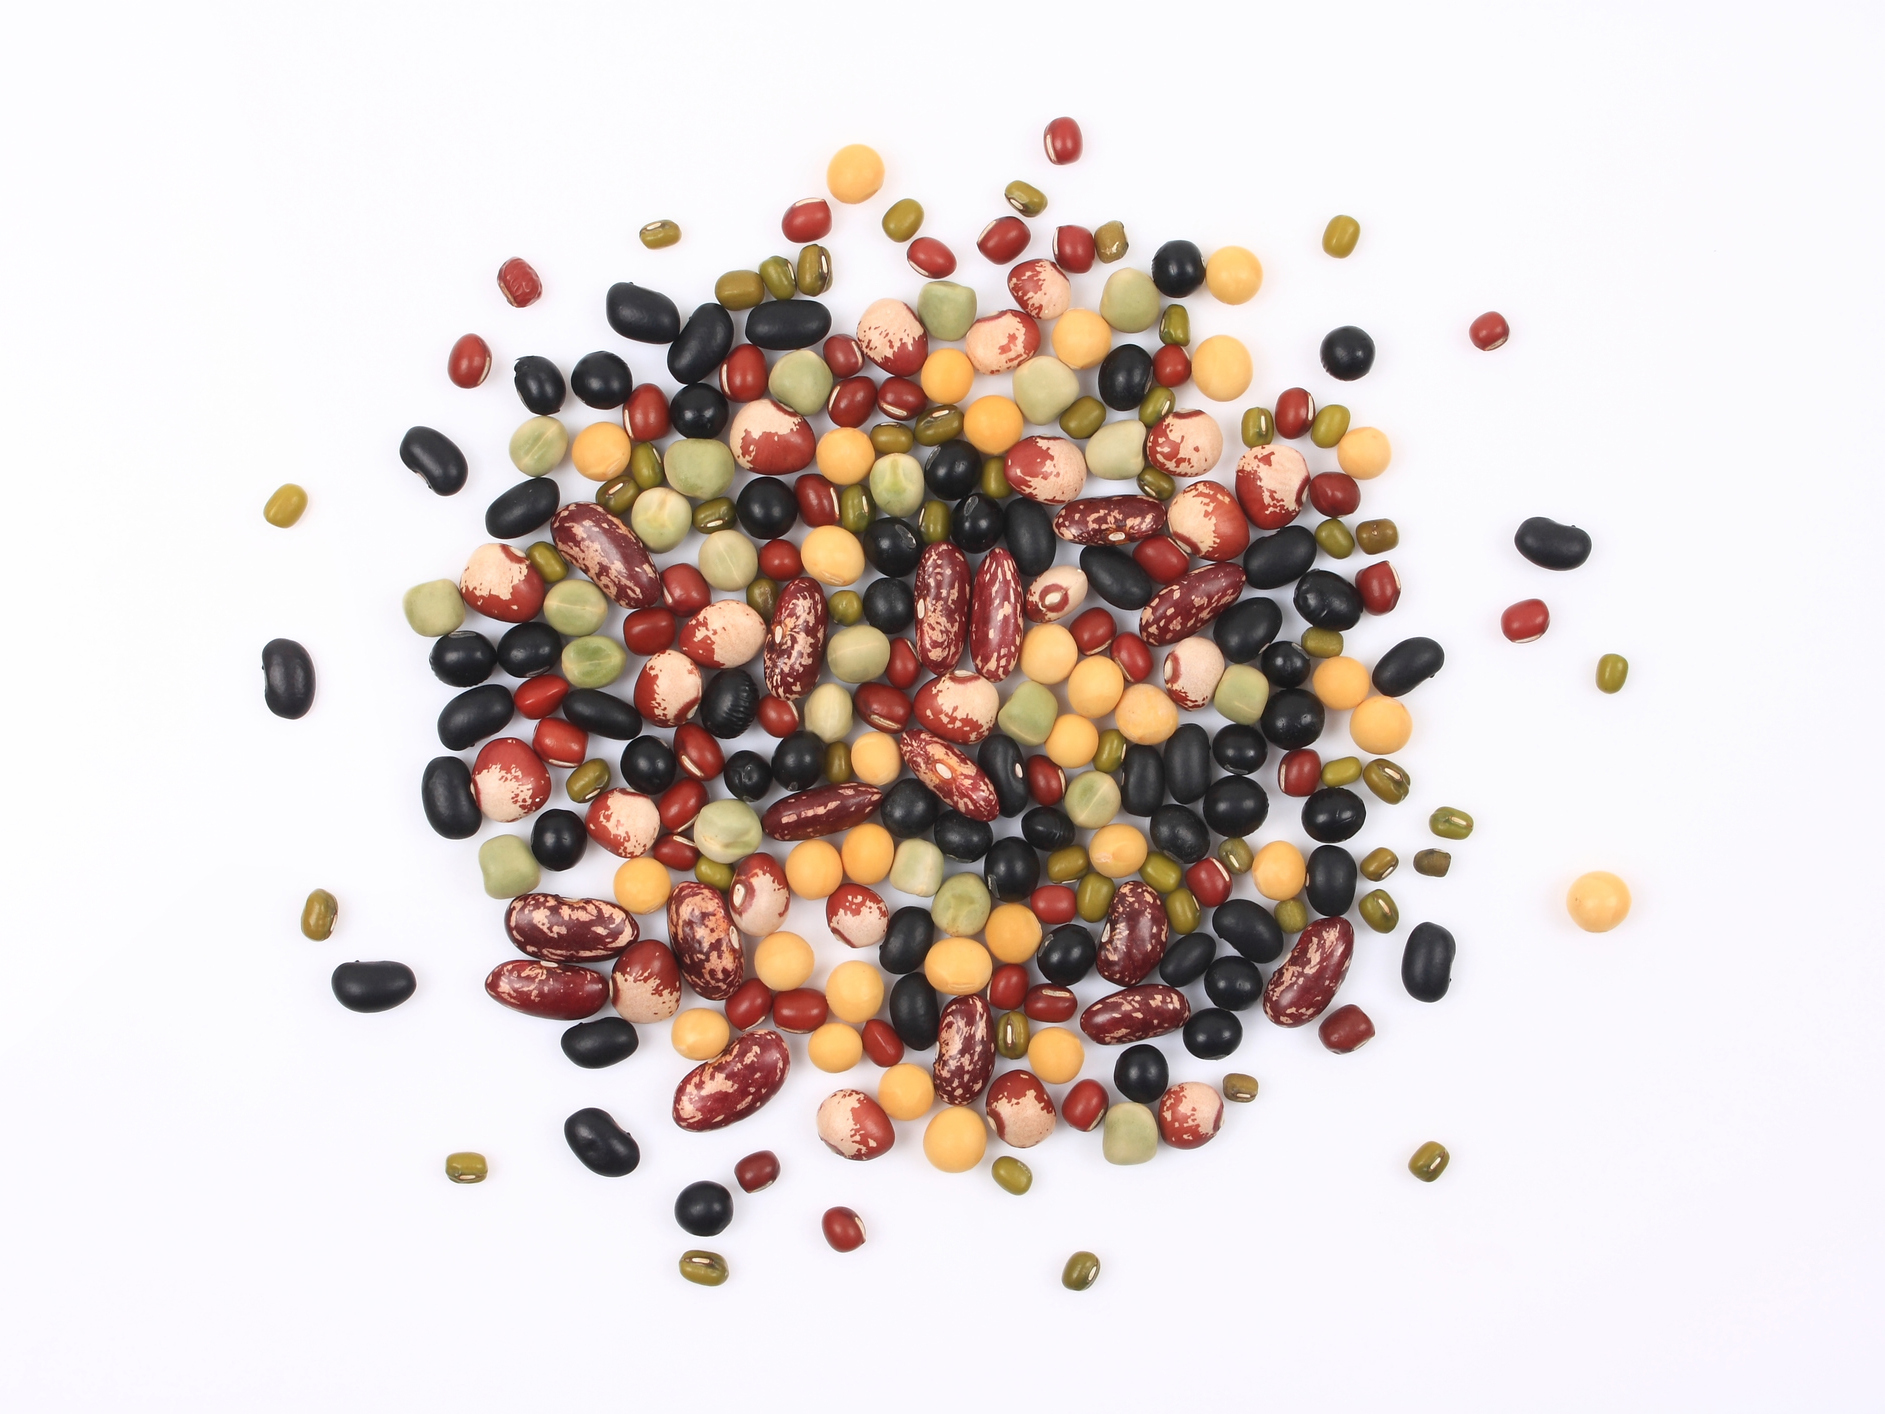 Dramatically lower your heart disease risk with legumes